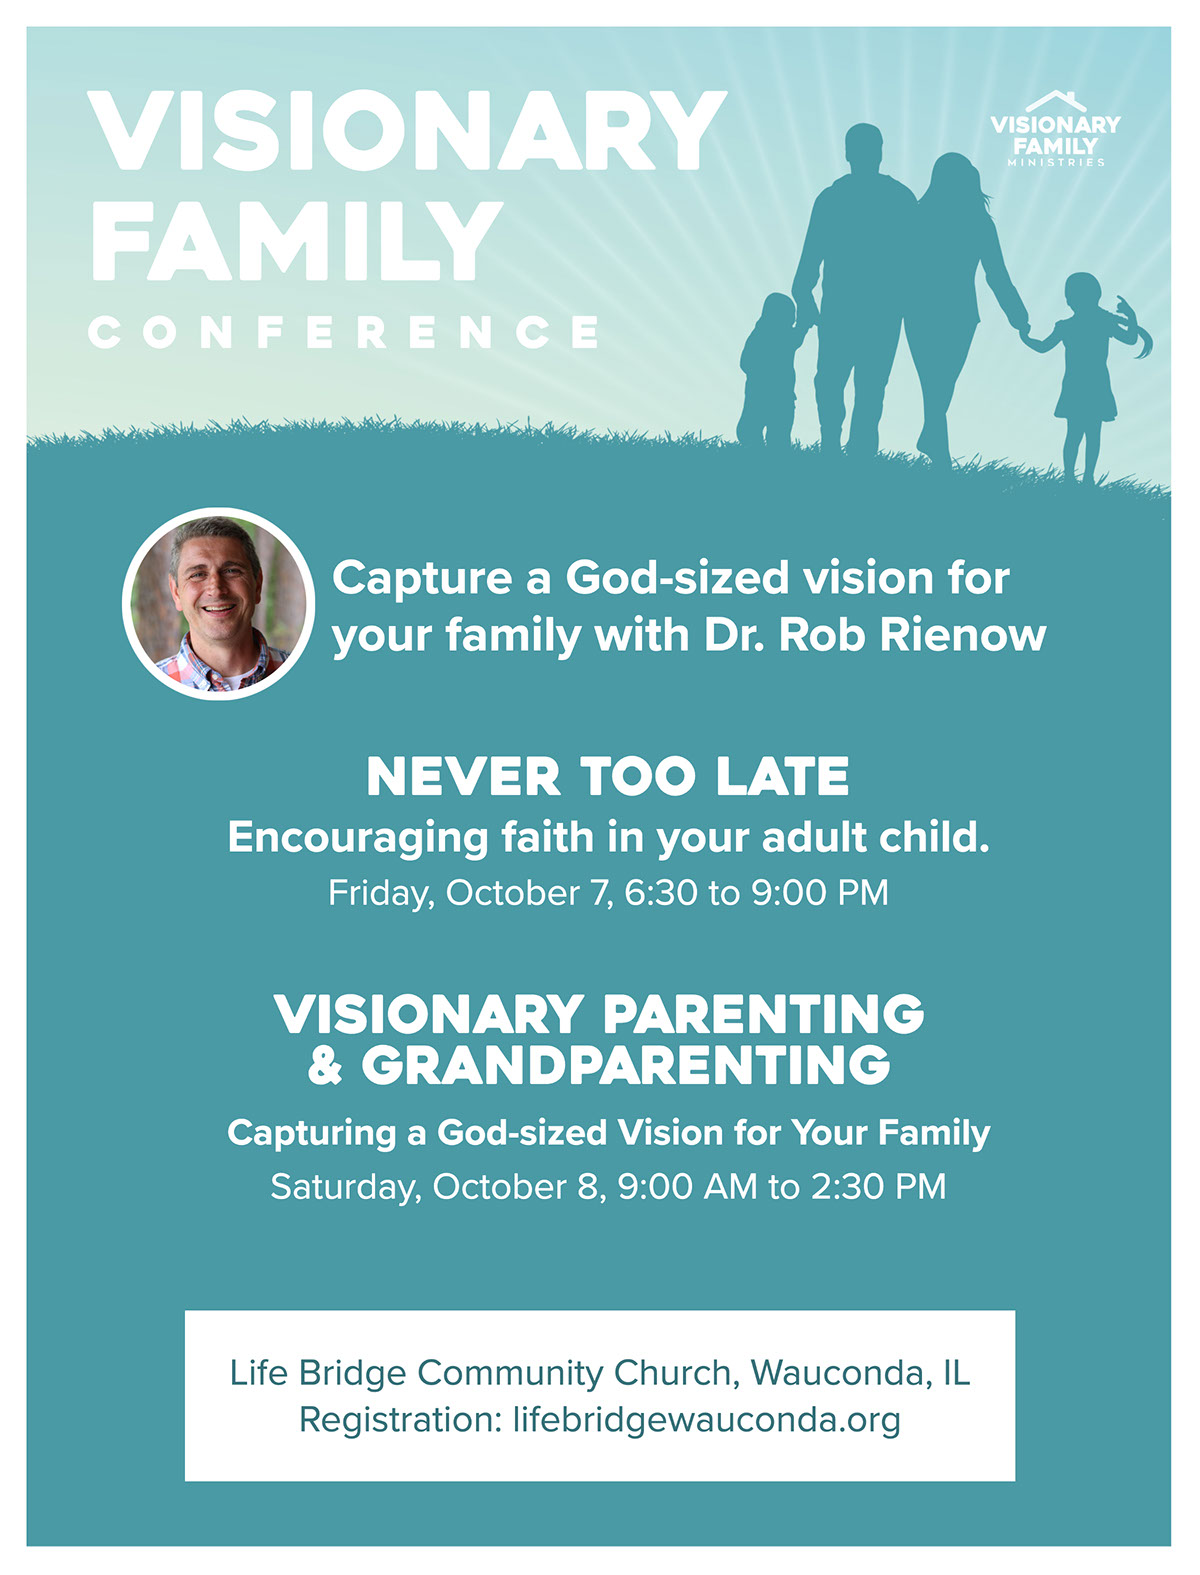 Visionary Family Visionary Family Conference Visionary parenting & Grandparenting Never Too Late Capture a God-sized vision for your family with Dr. Rob Rienow Encouraging faith in your adult child. Life Bridge Community Church, Wauconda, IL Registration: lifebridgewauconda.org Capturing a God-sized Vision for Your Family Saturday, October 8, 9:00 AM to 2:30 PM Friday, October 7, 6:30 to 9:00 PM